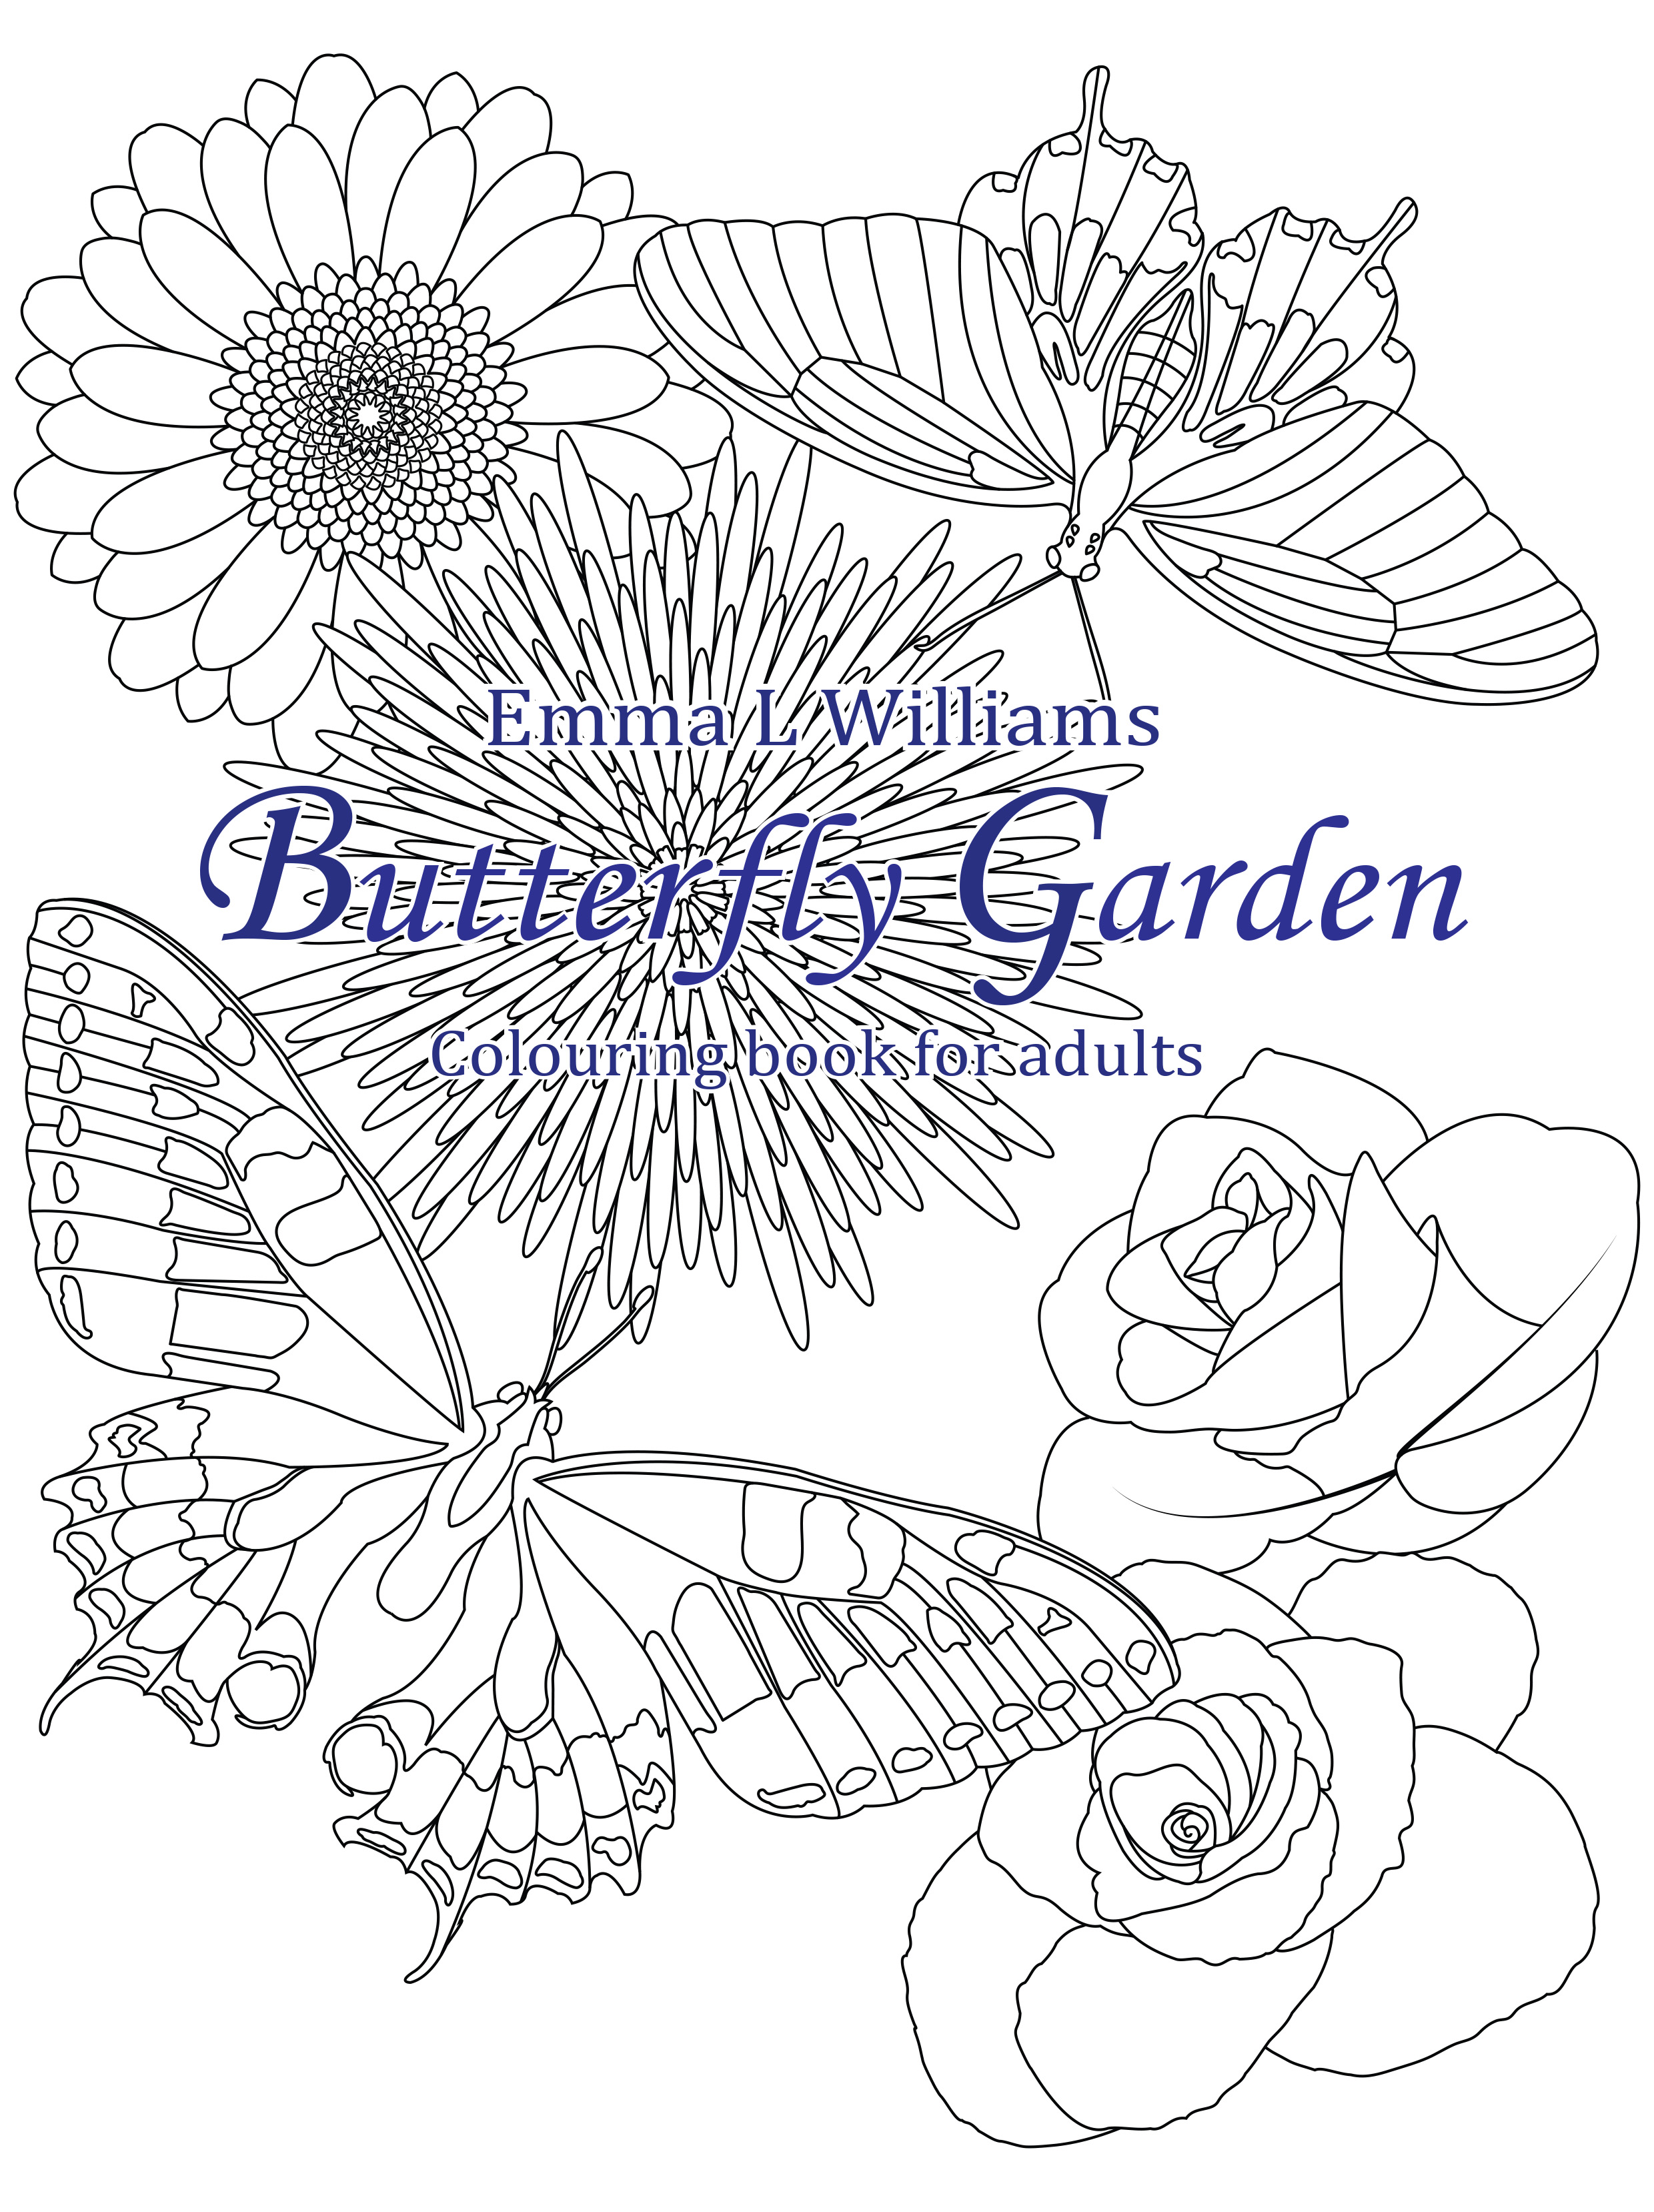 Download Butterfly garden - Butterflies & insects Adult Coloring Pages